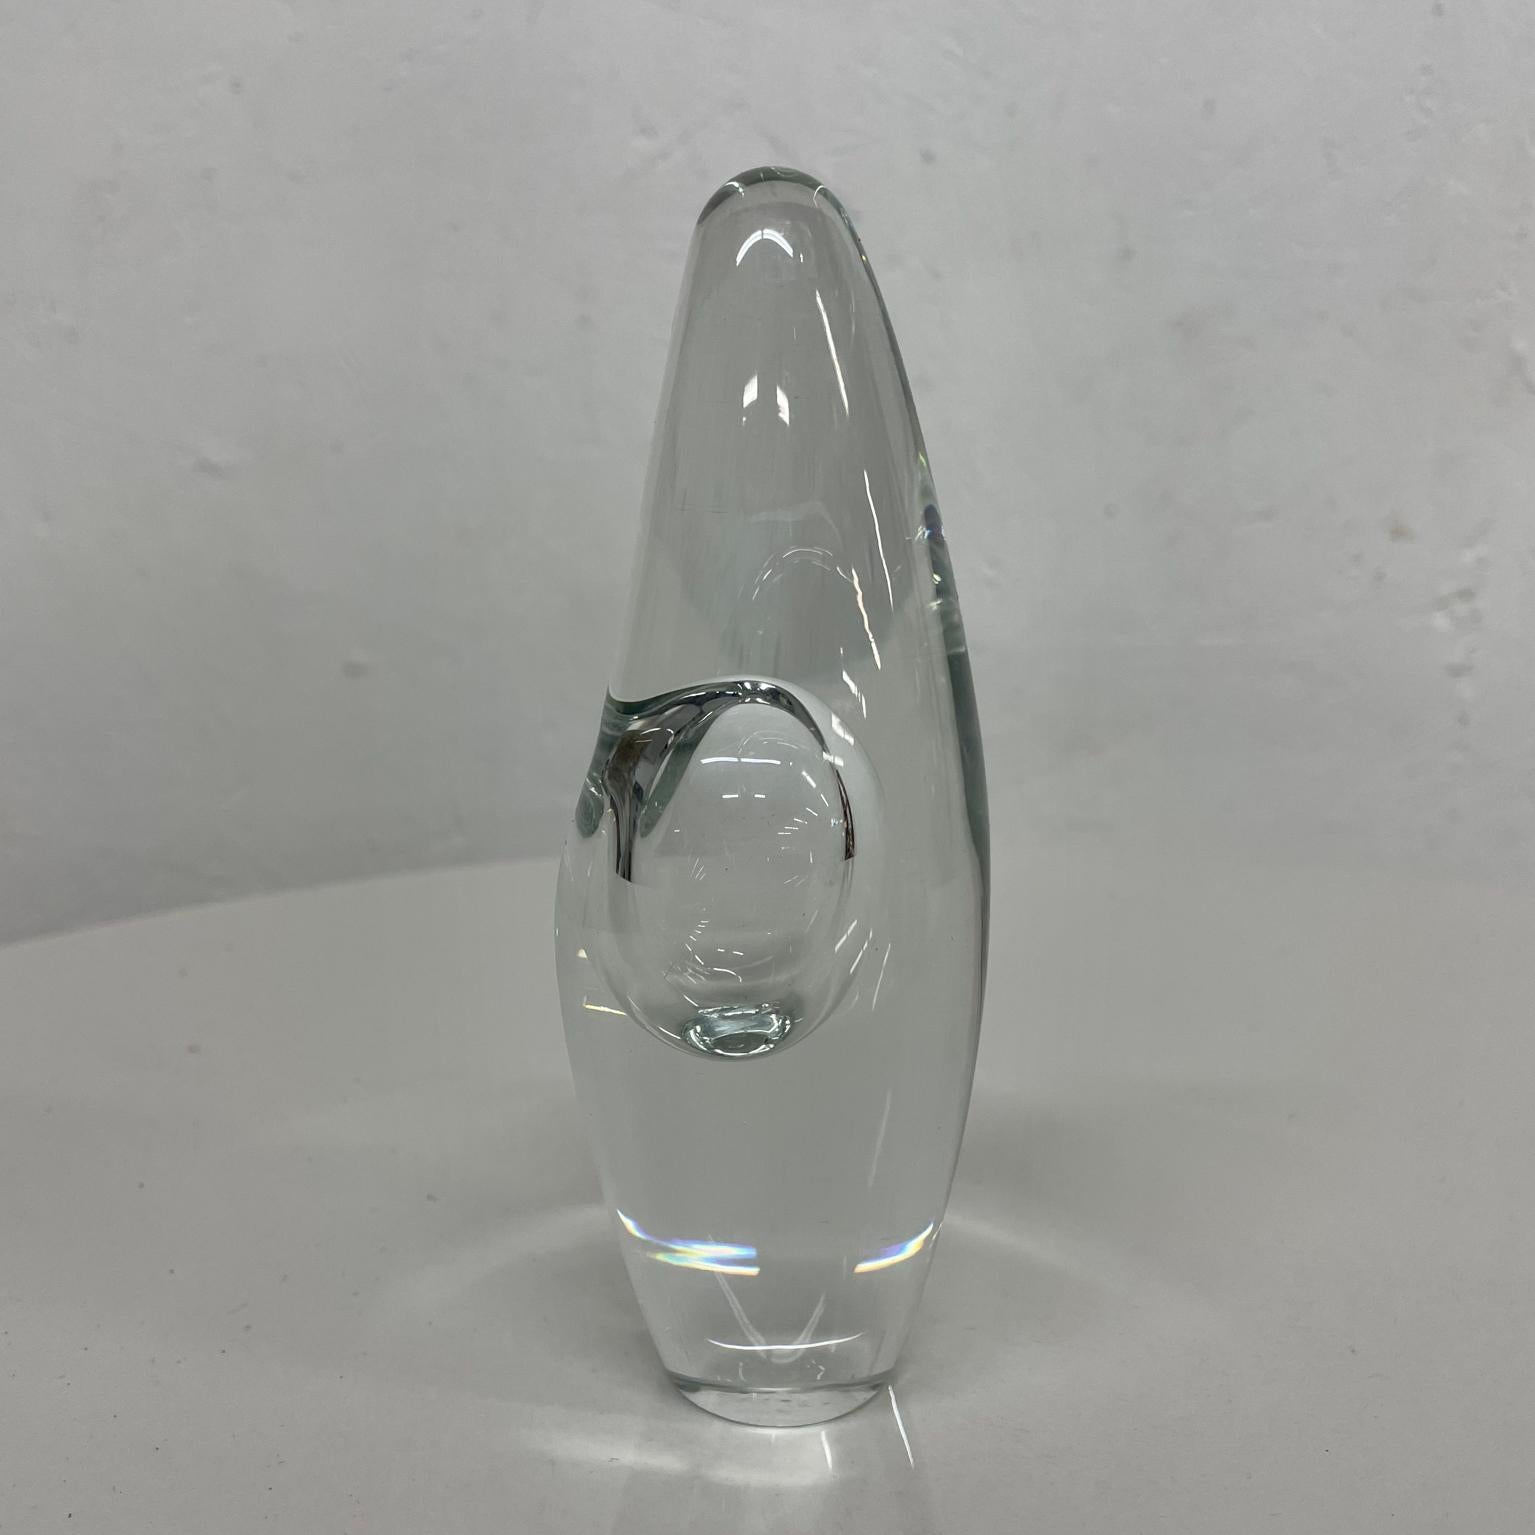 Mid-Century Modern 1957 Glass Vase Orchidée by Timo Sarpaneva for Iittala Finland For Sale